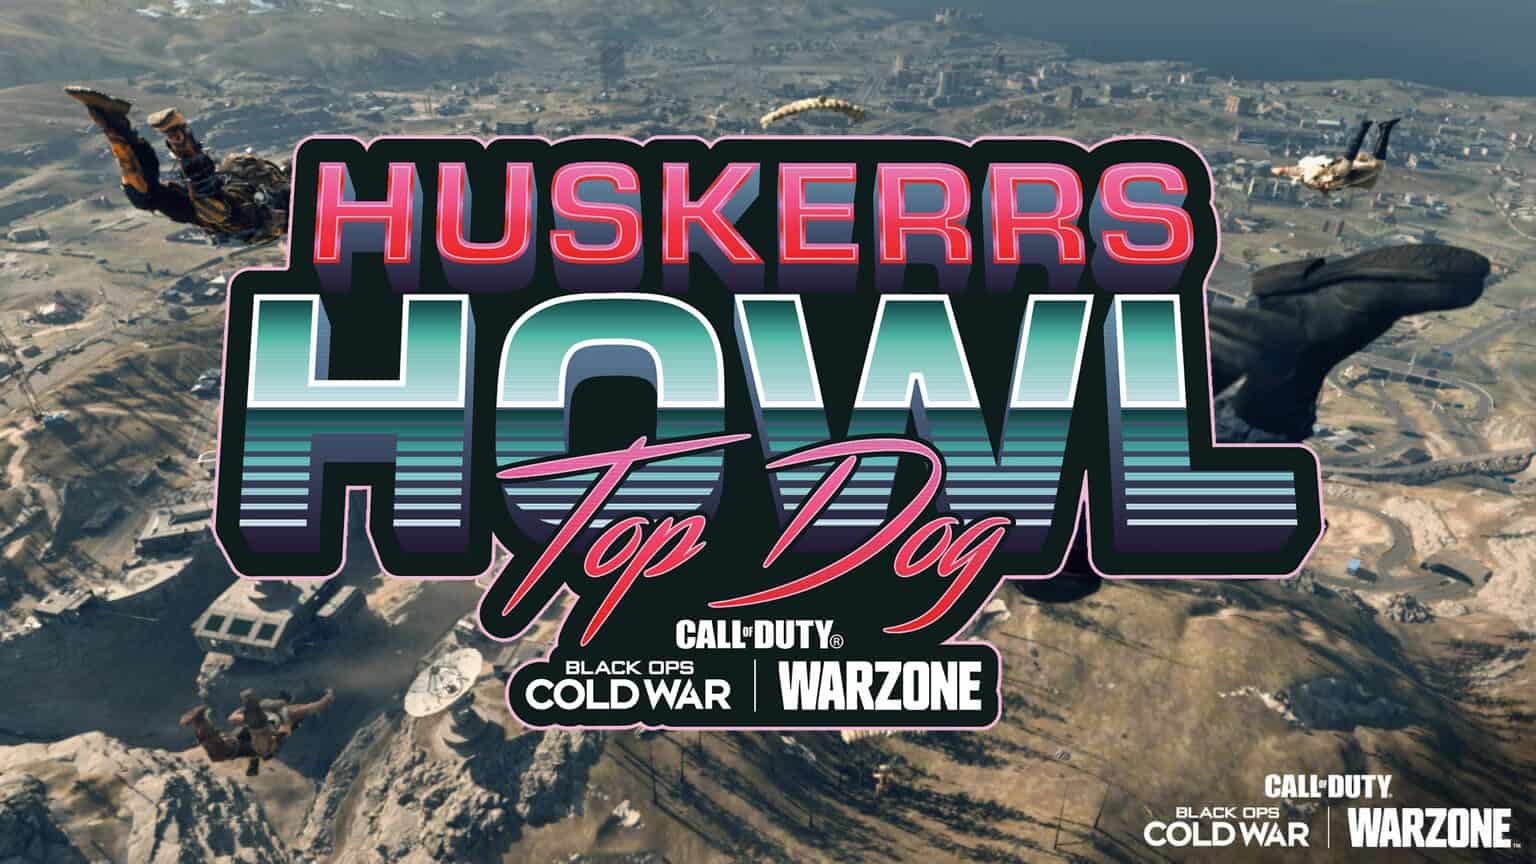 How To Watch $200K HusKerrs Howl: Top Dog Warzone Tournament